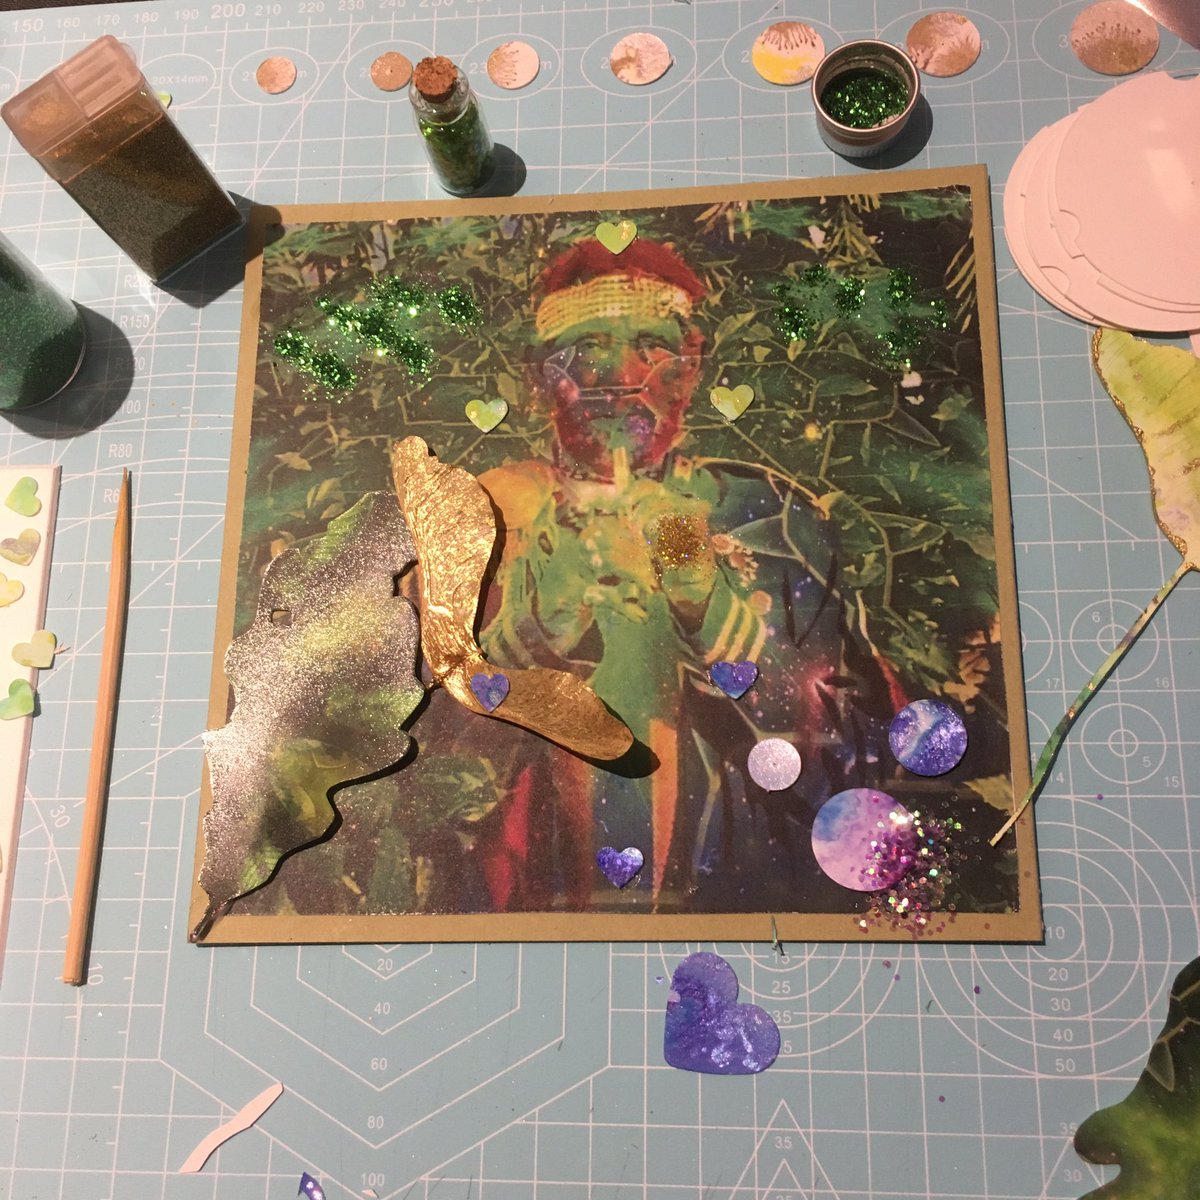 #ElevensesHour Custom piece in progress,is this for you or someone who's a #LeeScratchPerry fan.Combining my @StudioSara7 artwork with the Papercutting,it called for it,saying 'I need 3D, please decorate!'An homage to the great reggae producer artist #CraftBizParty